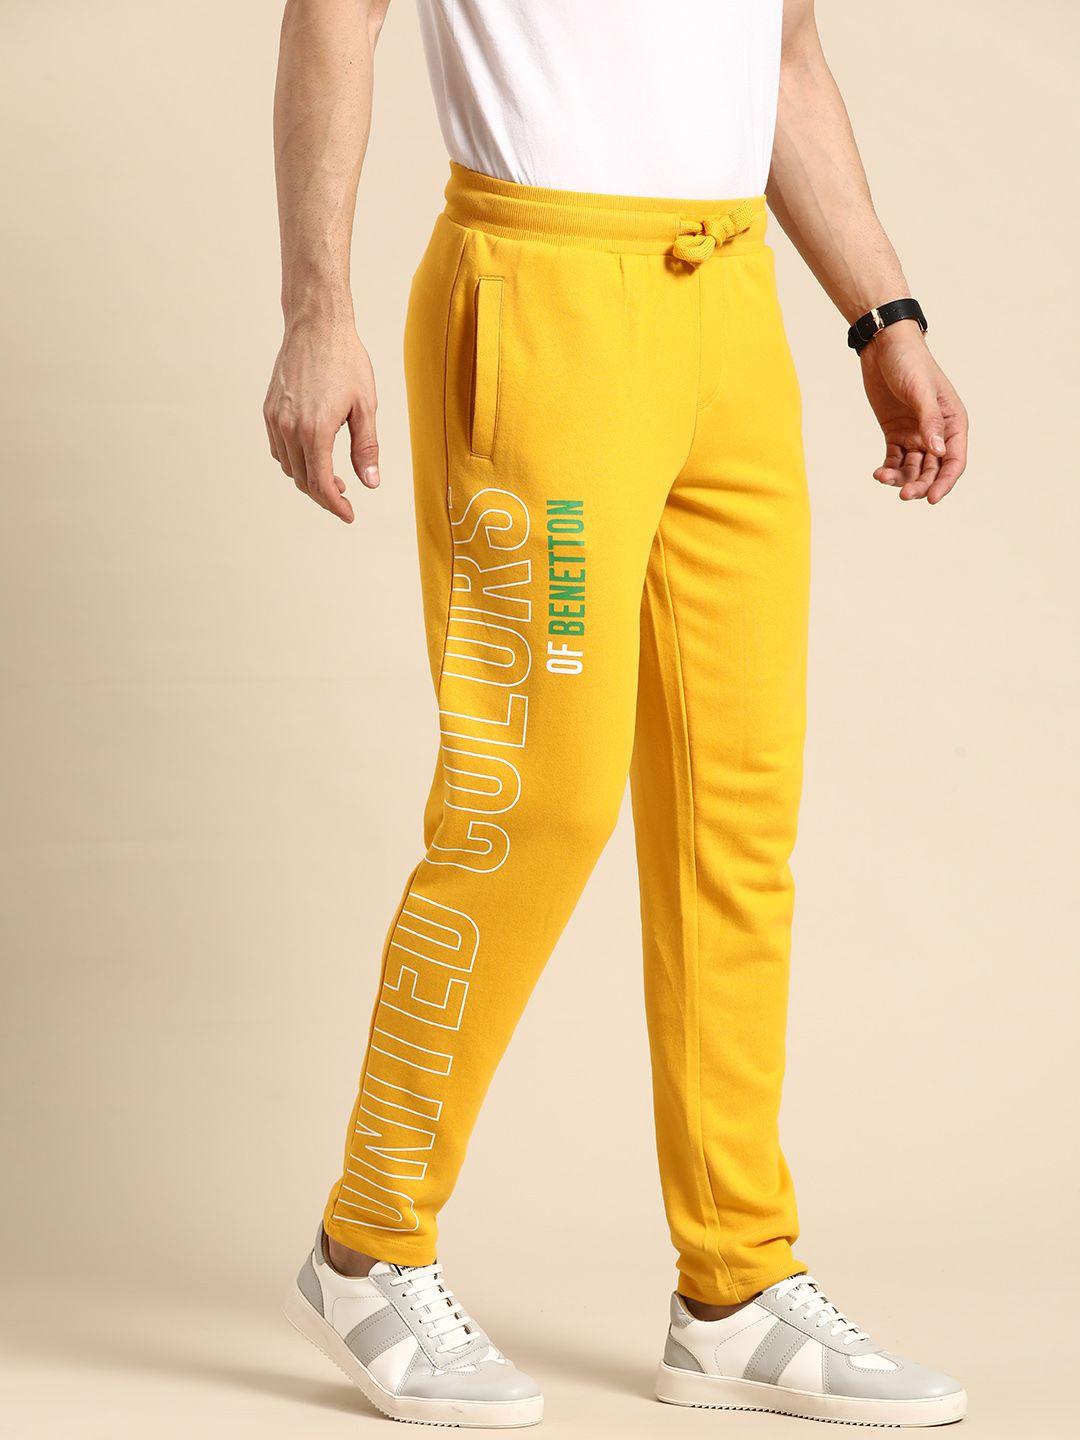 united colors of benetton men brand logo printed pure cotton track pants